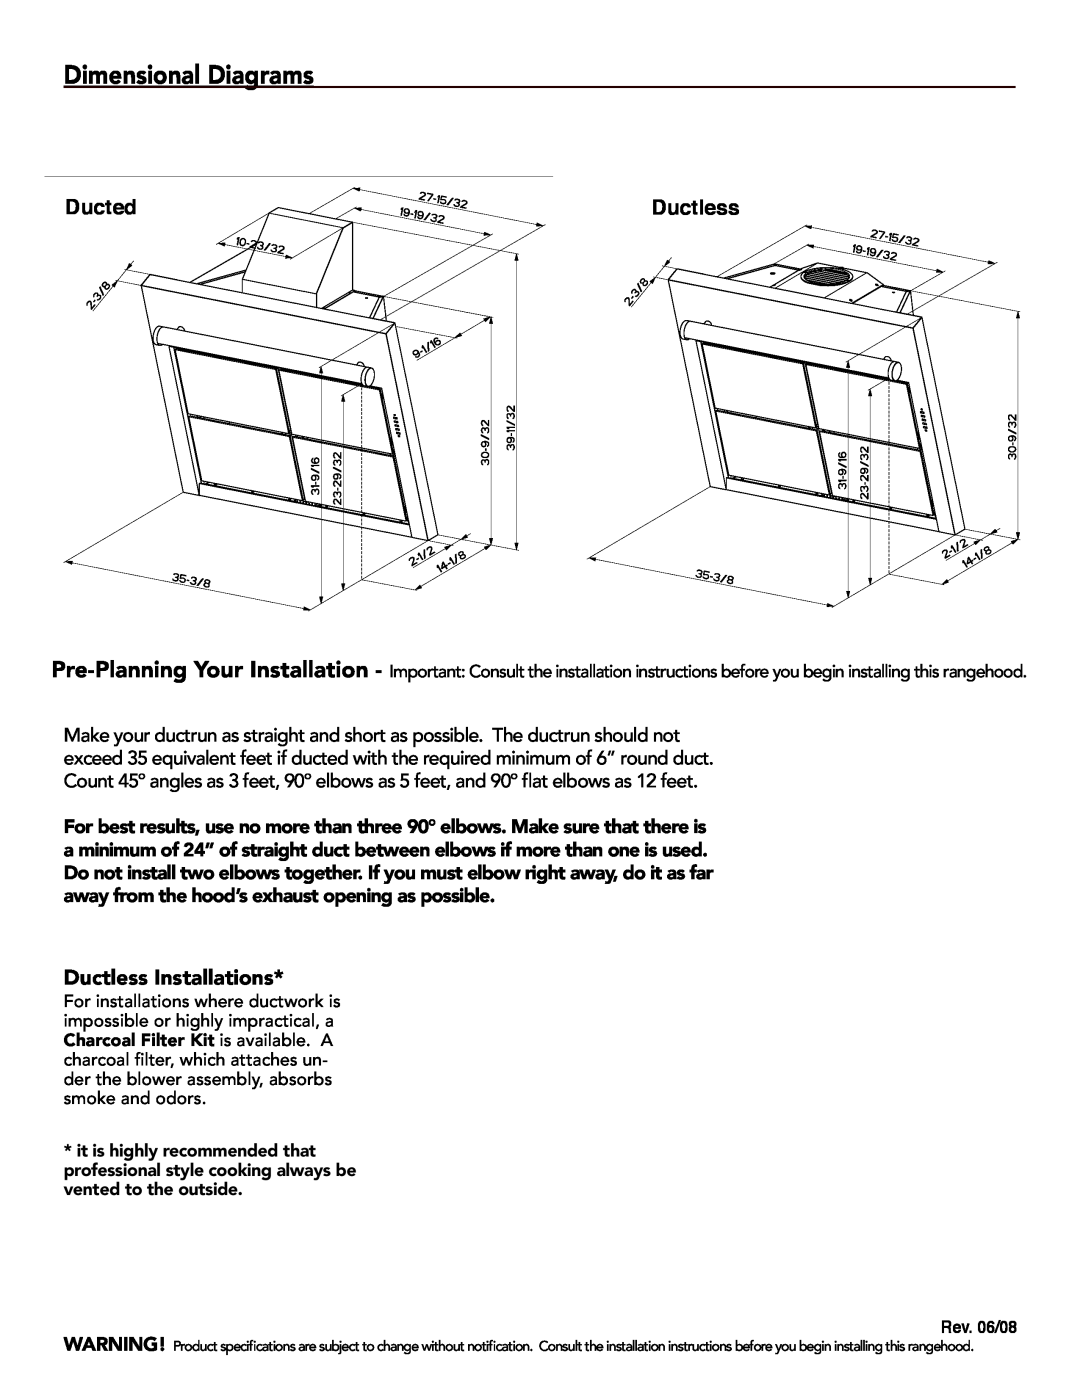 Faber 630003947 manual Dimensional Diagrams, Ducted, Ductless Installations, Rev. 06/08 